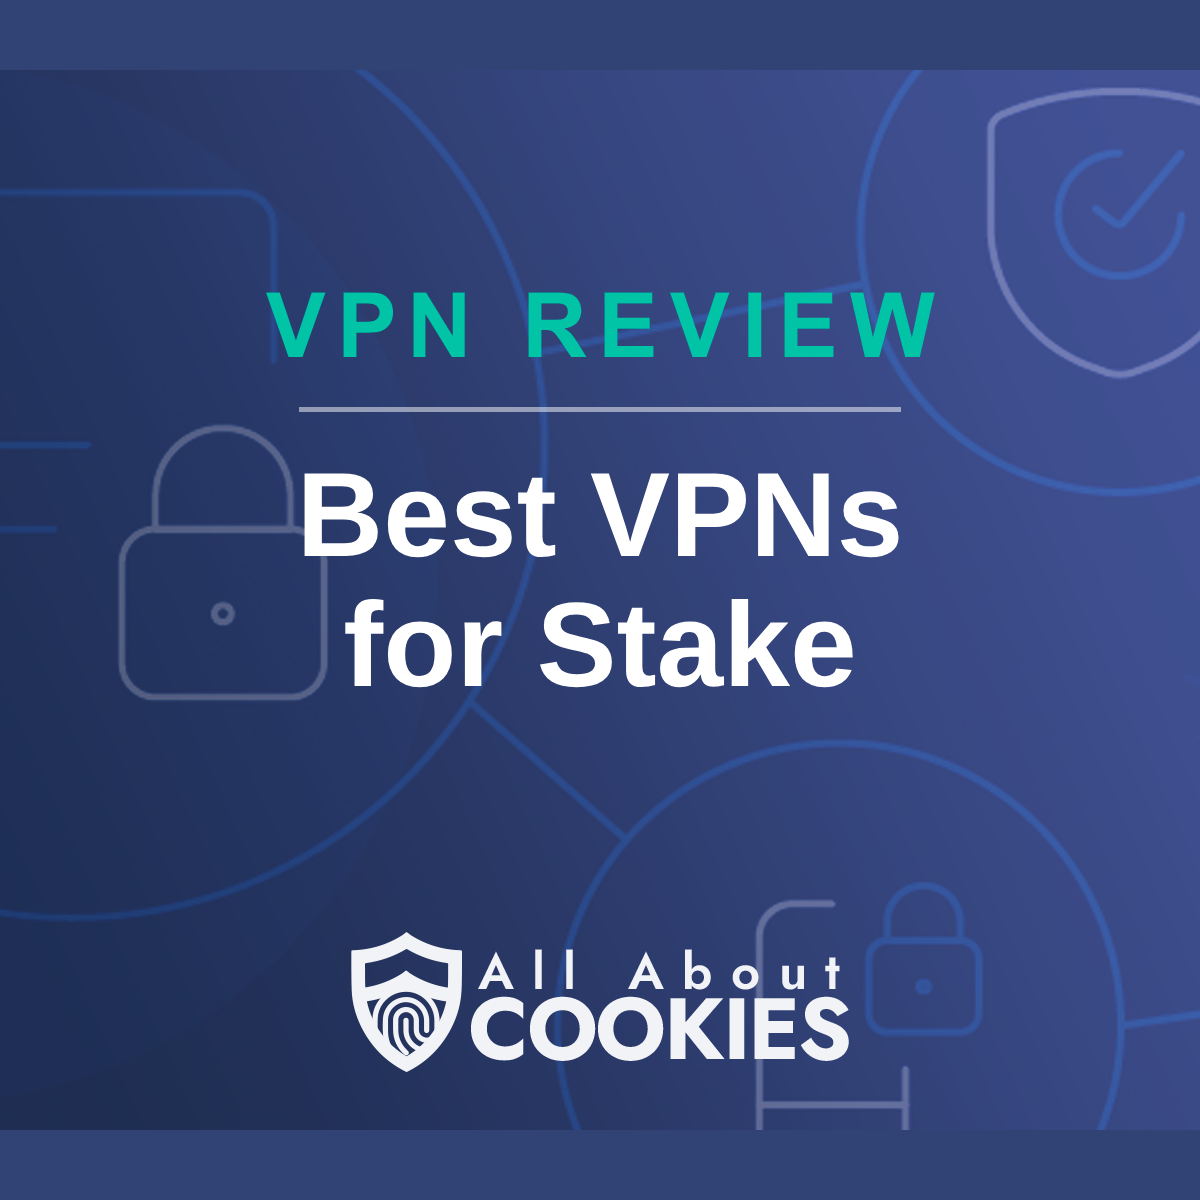 A blue background with images of locks and shields with the text &quot;VPN Review Best VPNs for Stake&quot; and the All About Cookies logo. 